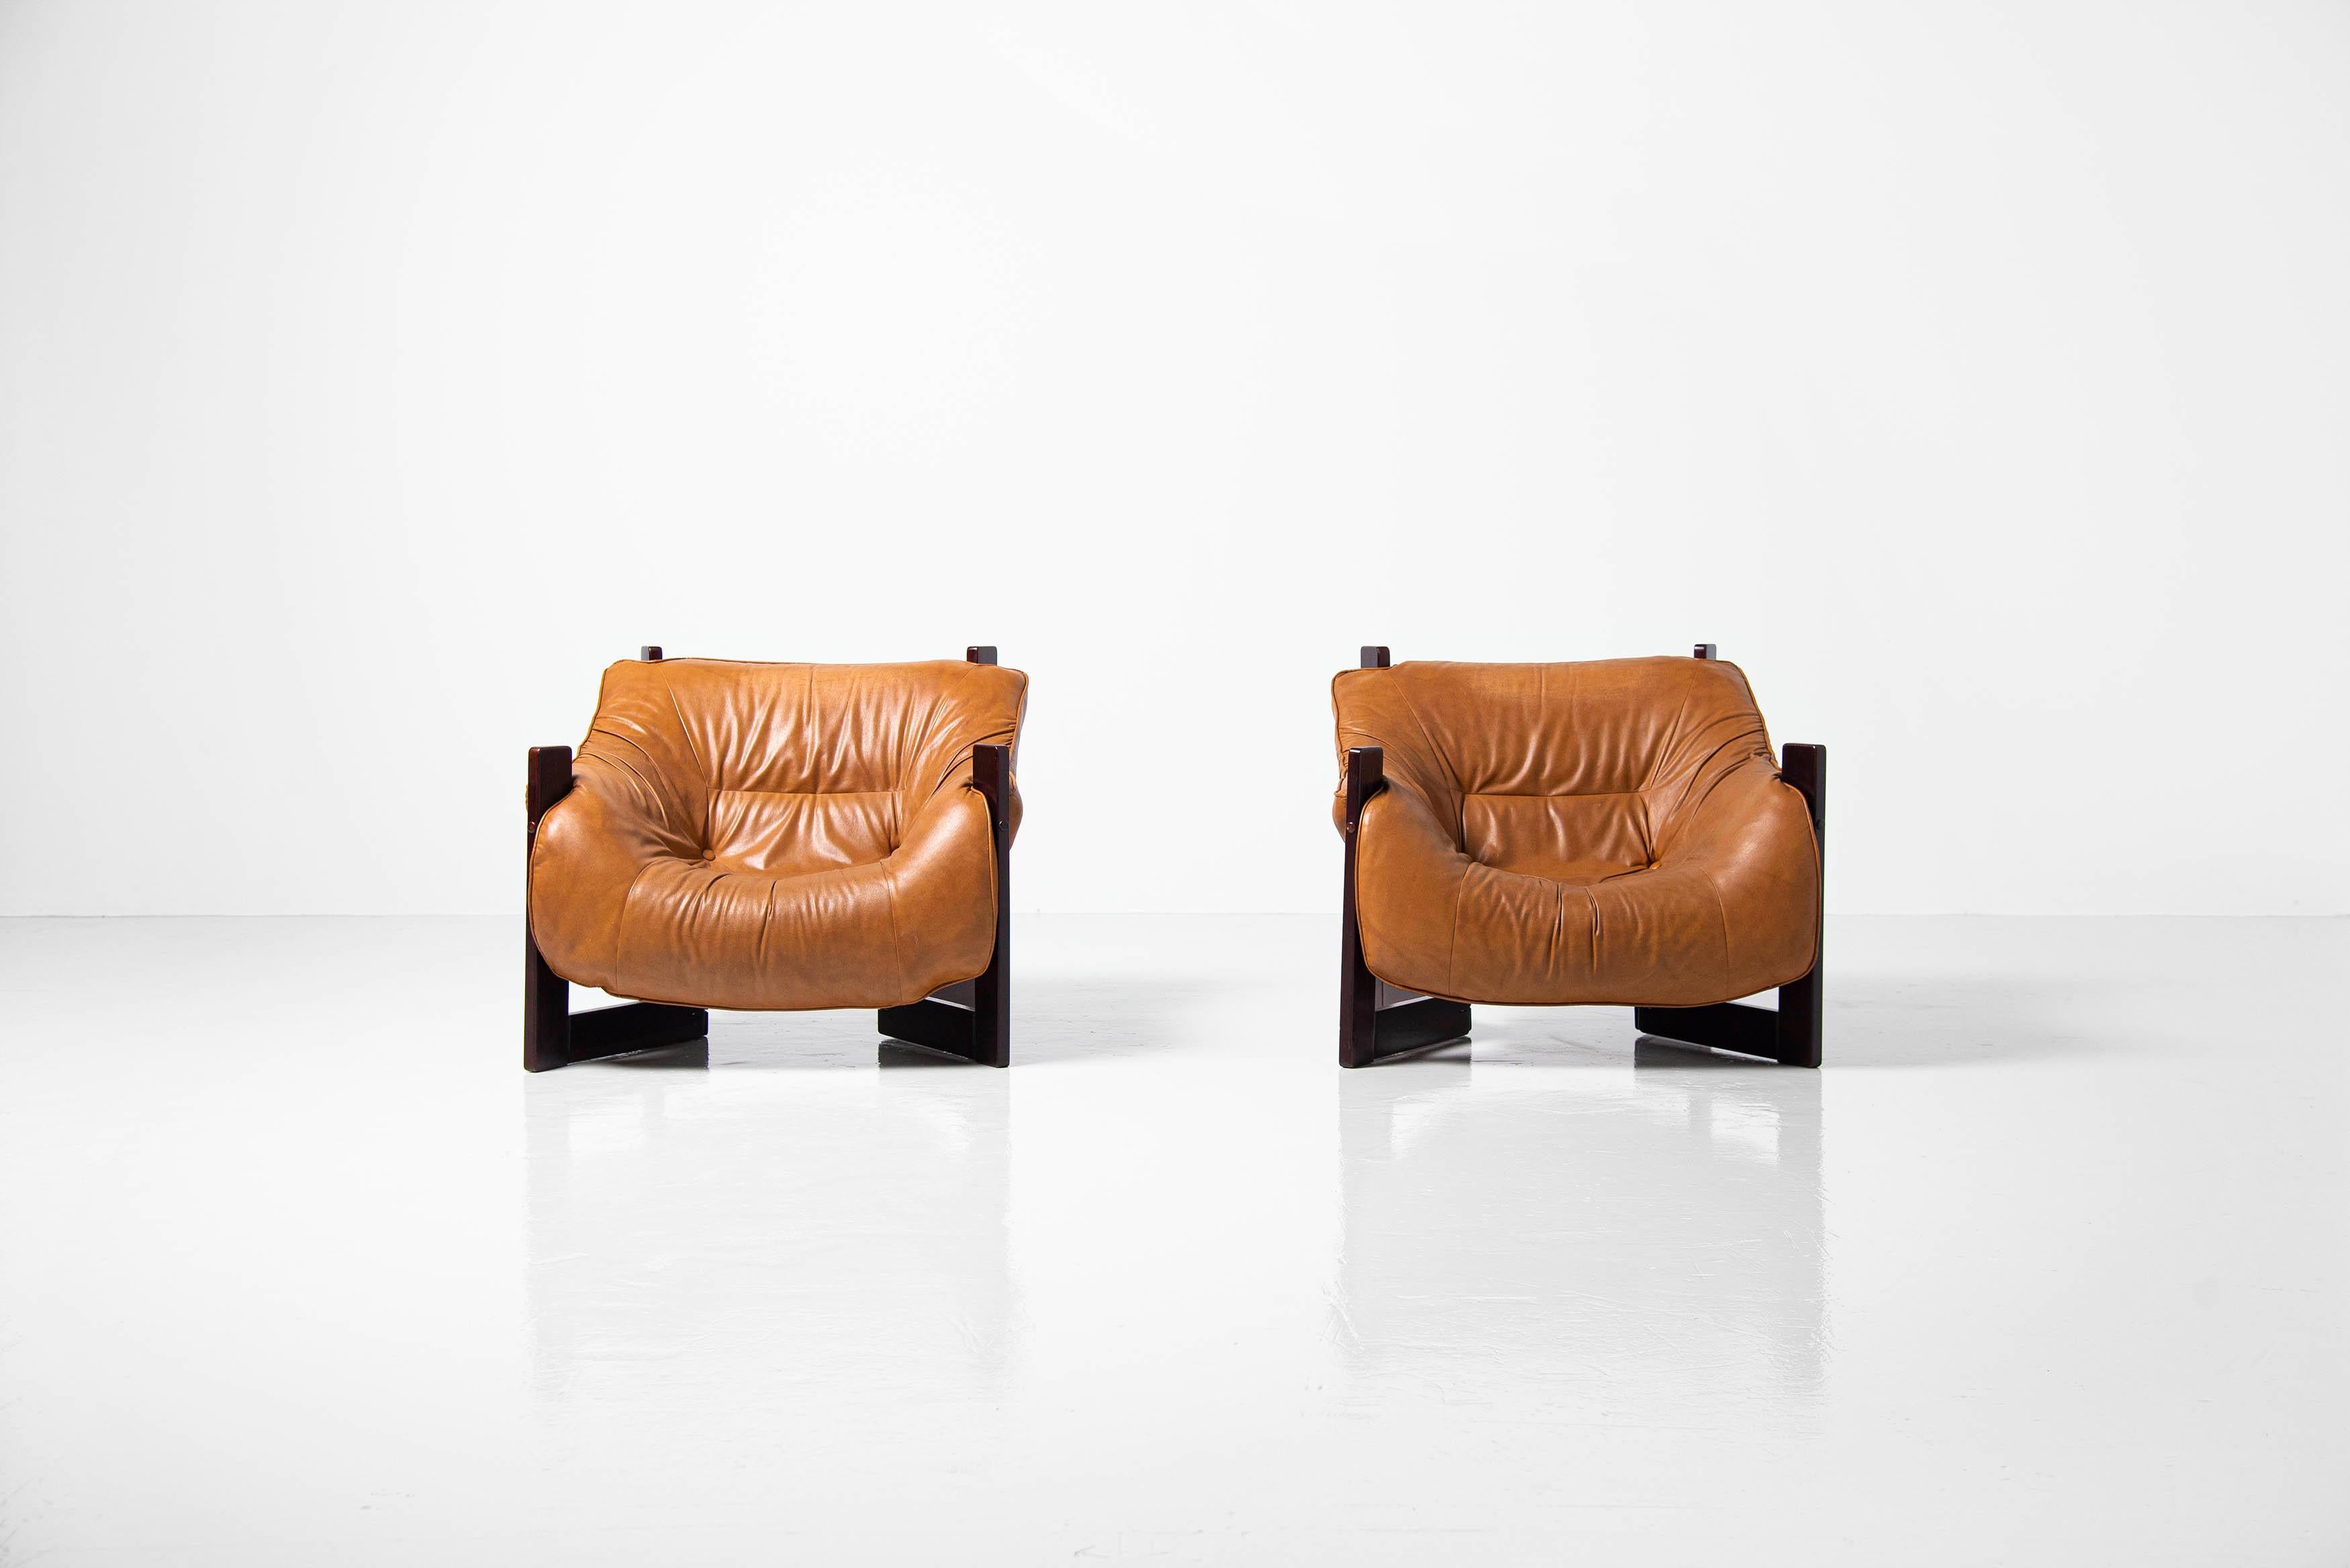 Very nice sculptural set of lounge chairs designed and manufactured by Percival Lafer, Brazil 1970. Percival Lafer was one of the leading design manufacturers in Brazil who actually managed to produce futniture on a large, industrial scale. These